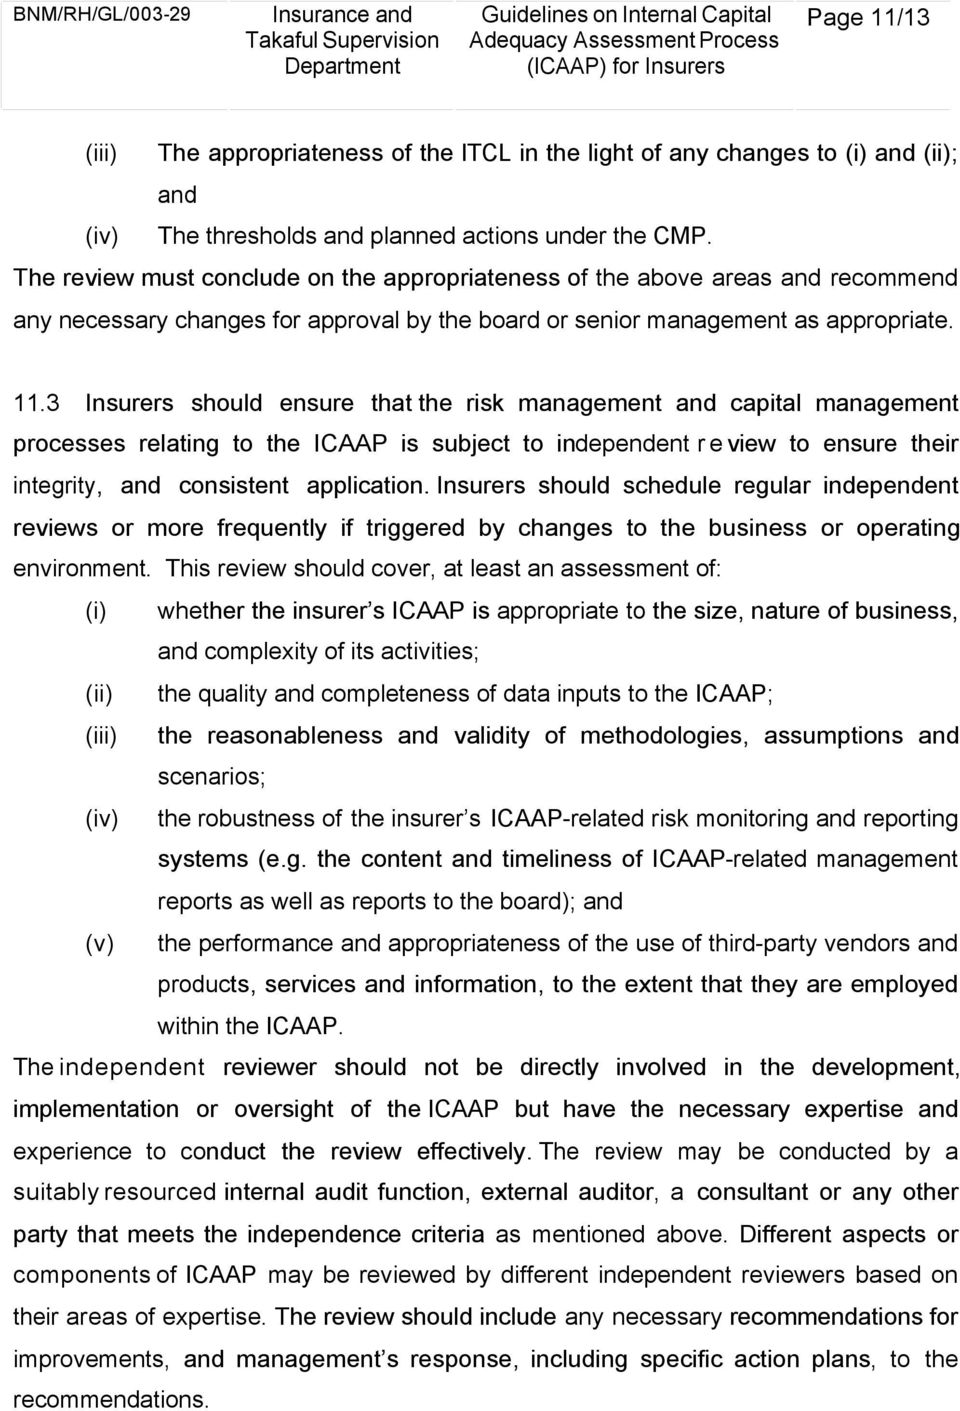 3 Insurers should ensure that the risk management and capital management processes relating to the ICAAP is subject to independent review to ensure their integrity, and consistent application.